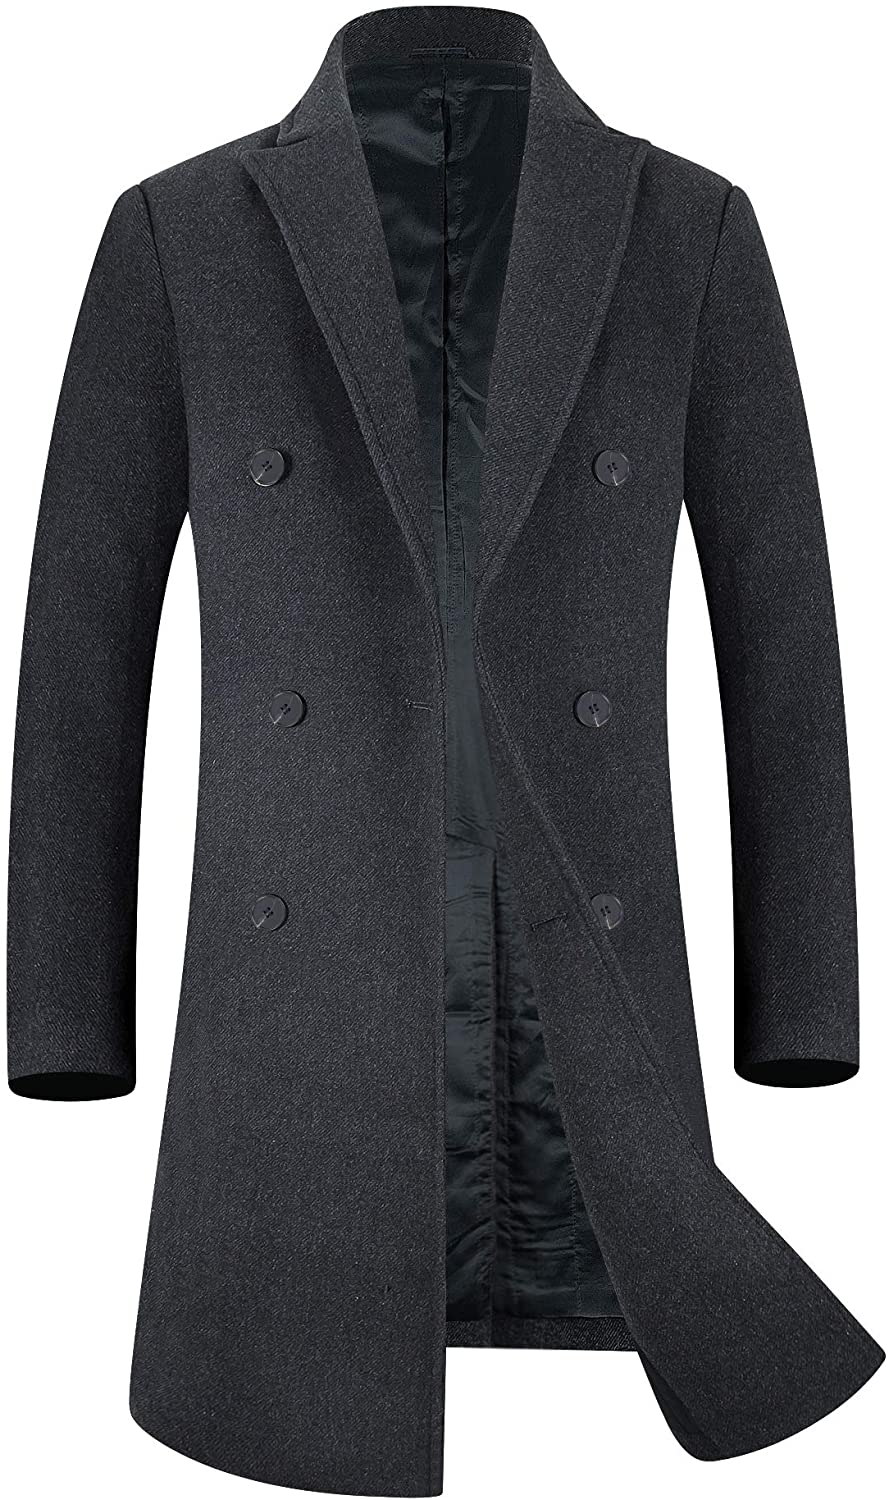 Men's Trench Coat 80% Wool Content French Long Jacket Winter Business ...